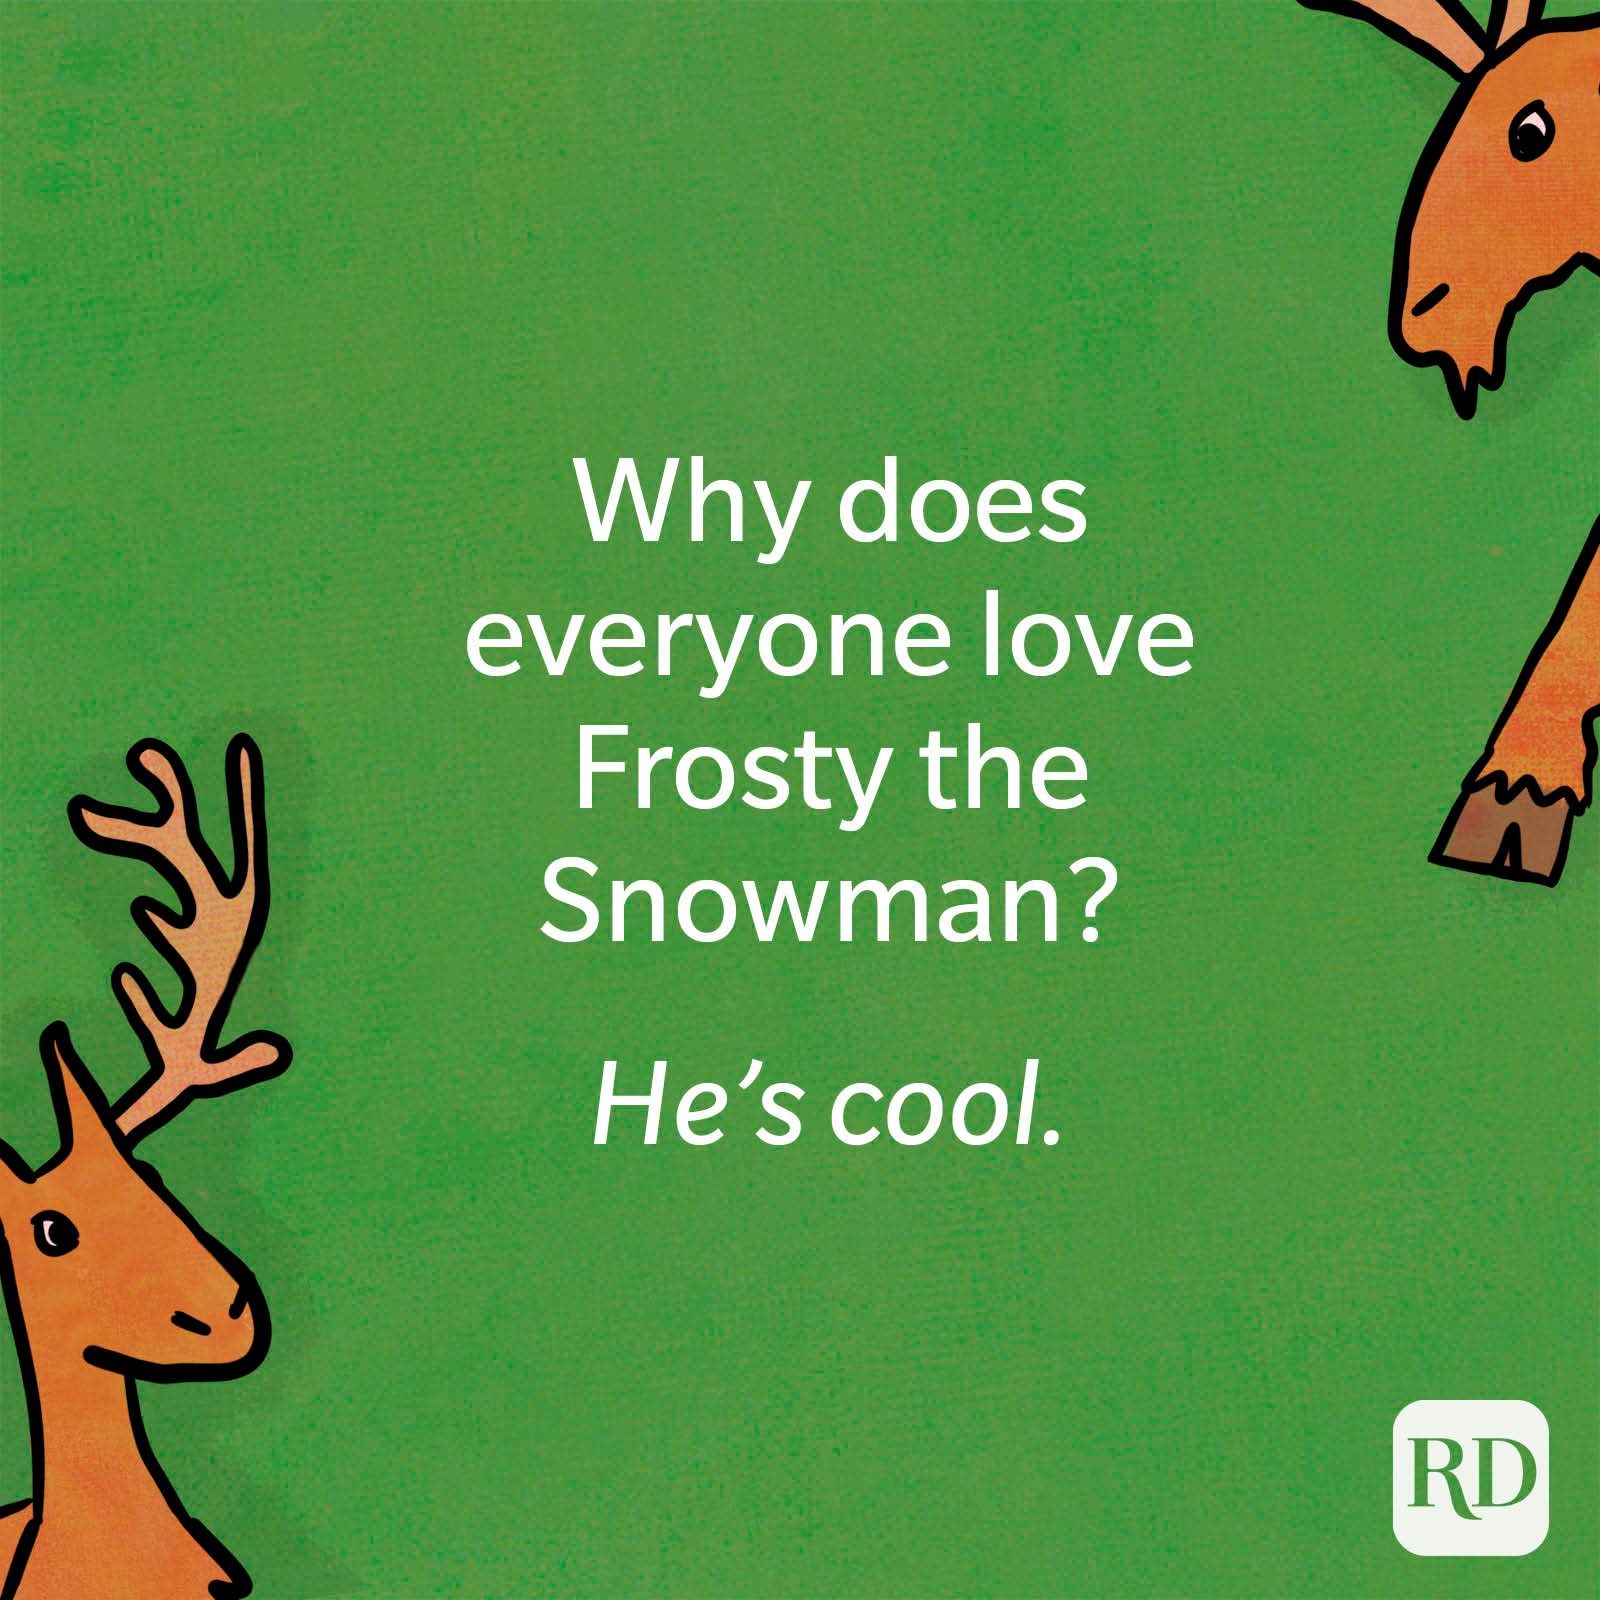 Why does everyone love Frosty the Snowman?